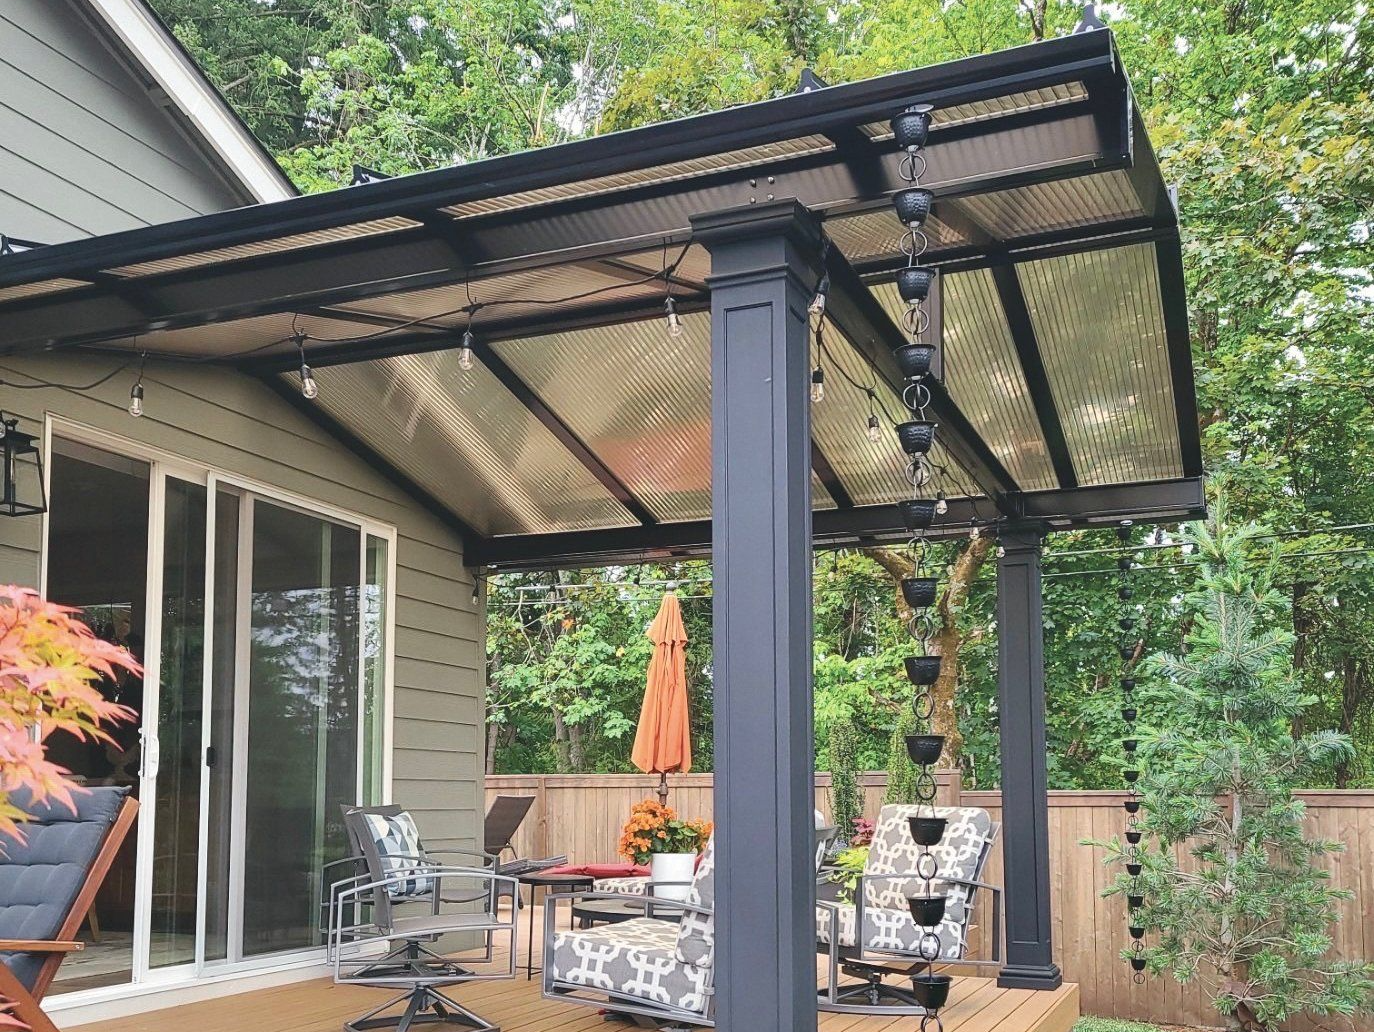 Patio Covers in Wood Village Oregon - Gable Roof with ACRYLITE Acrylic